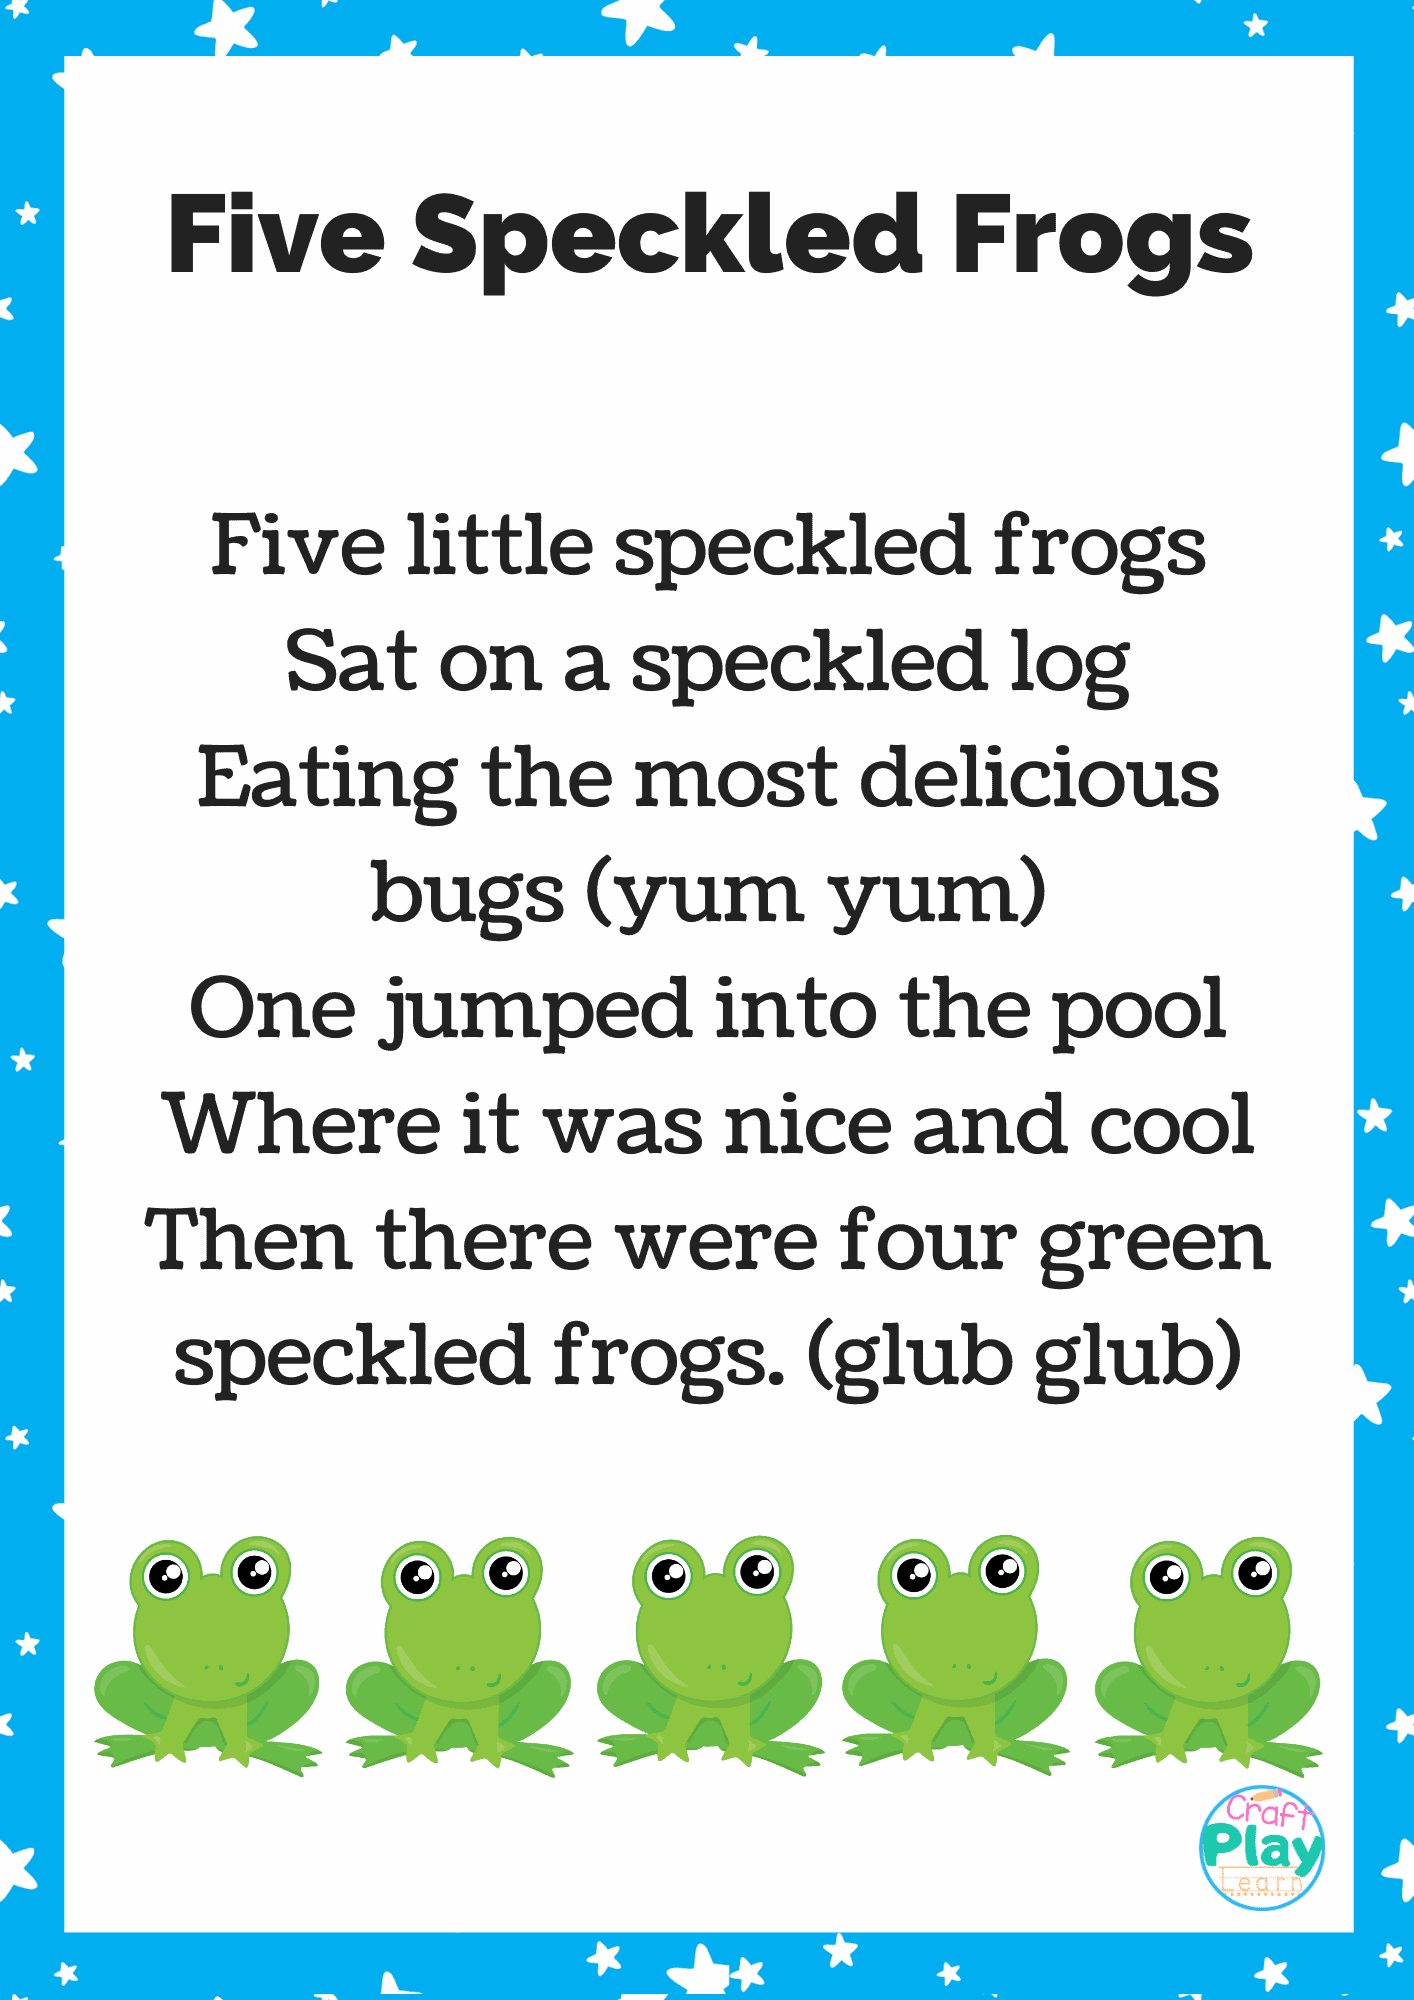 Five Little Speckled Frogs Lyrics In Spanish